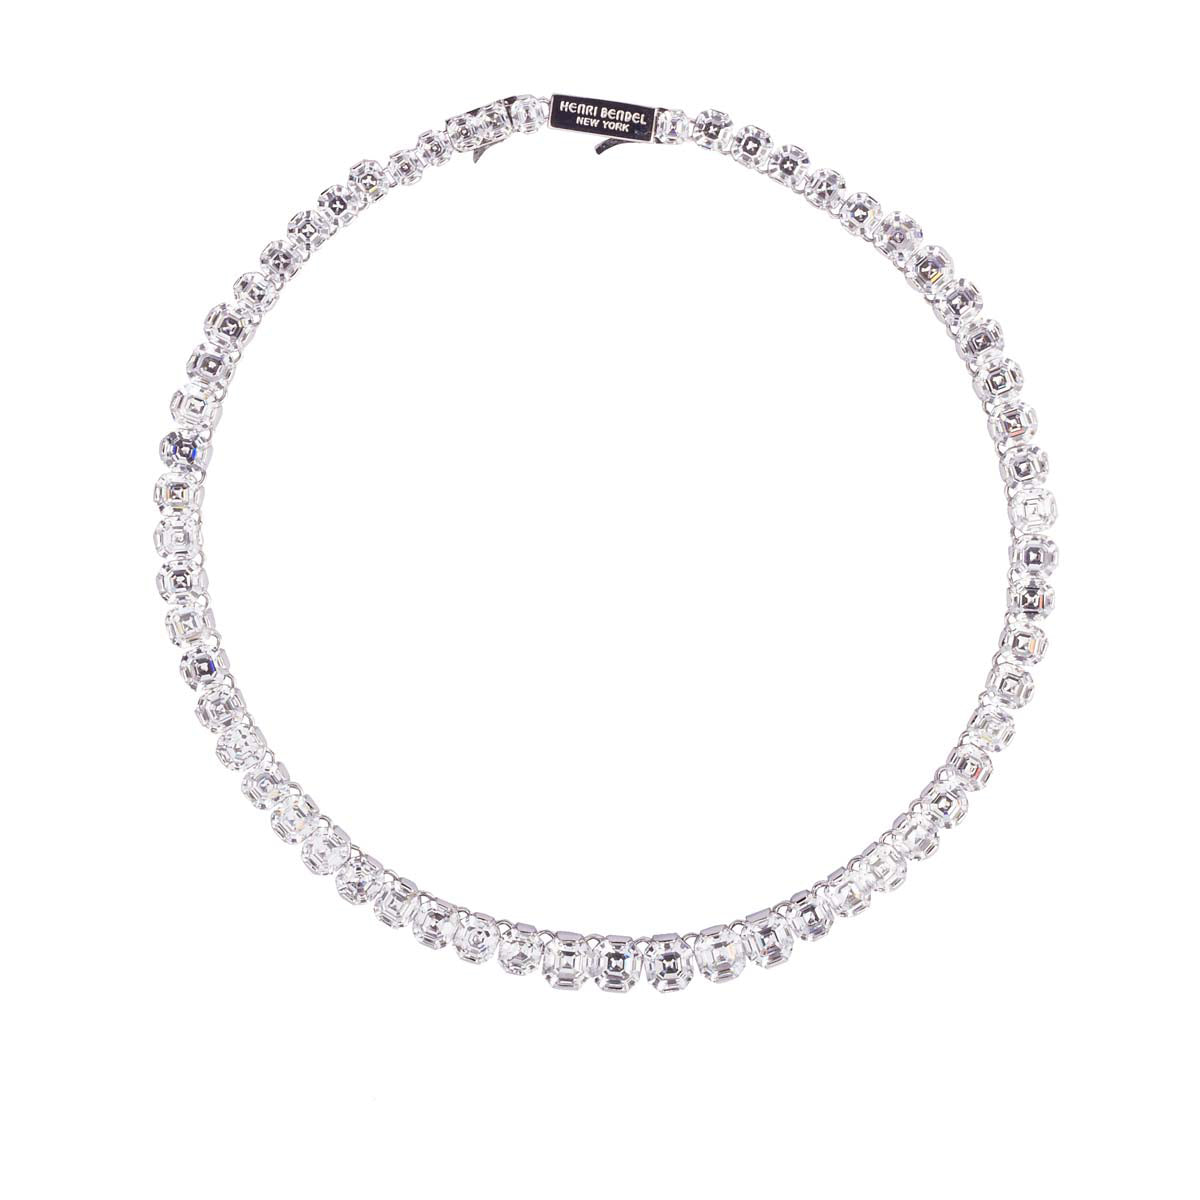 There's not a single thing we don't like about this piece! What's not to fall for in a single line of swarovski solitaires in silver.